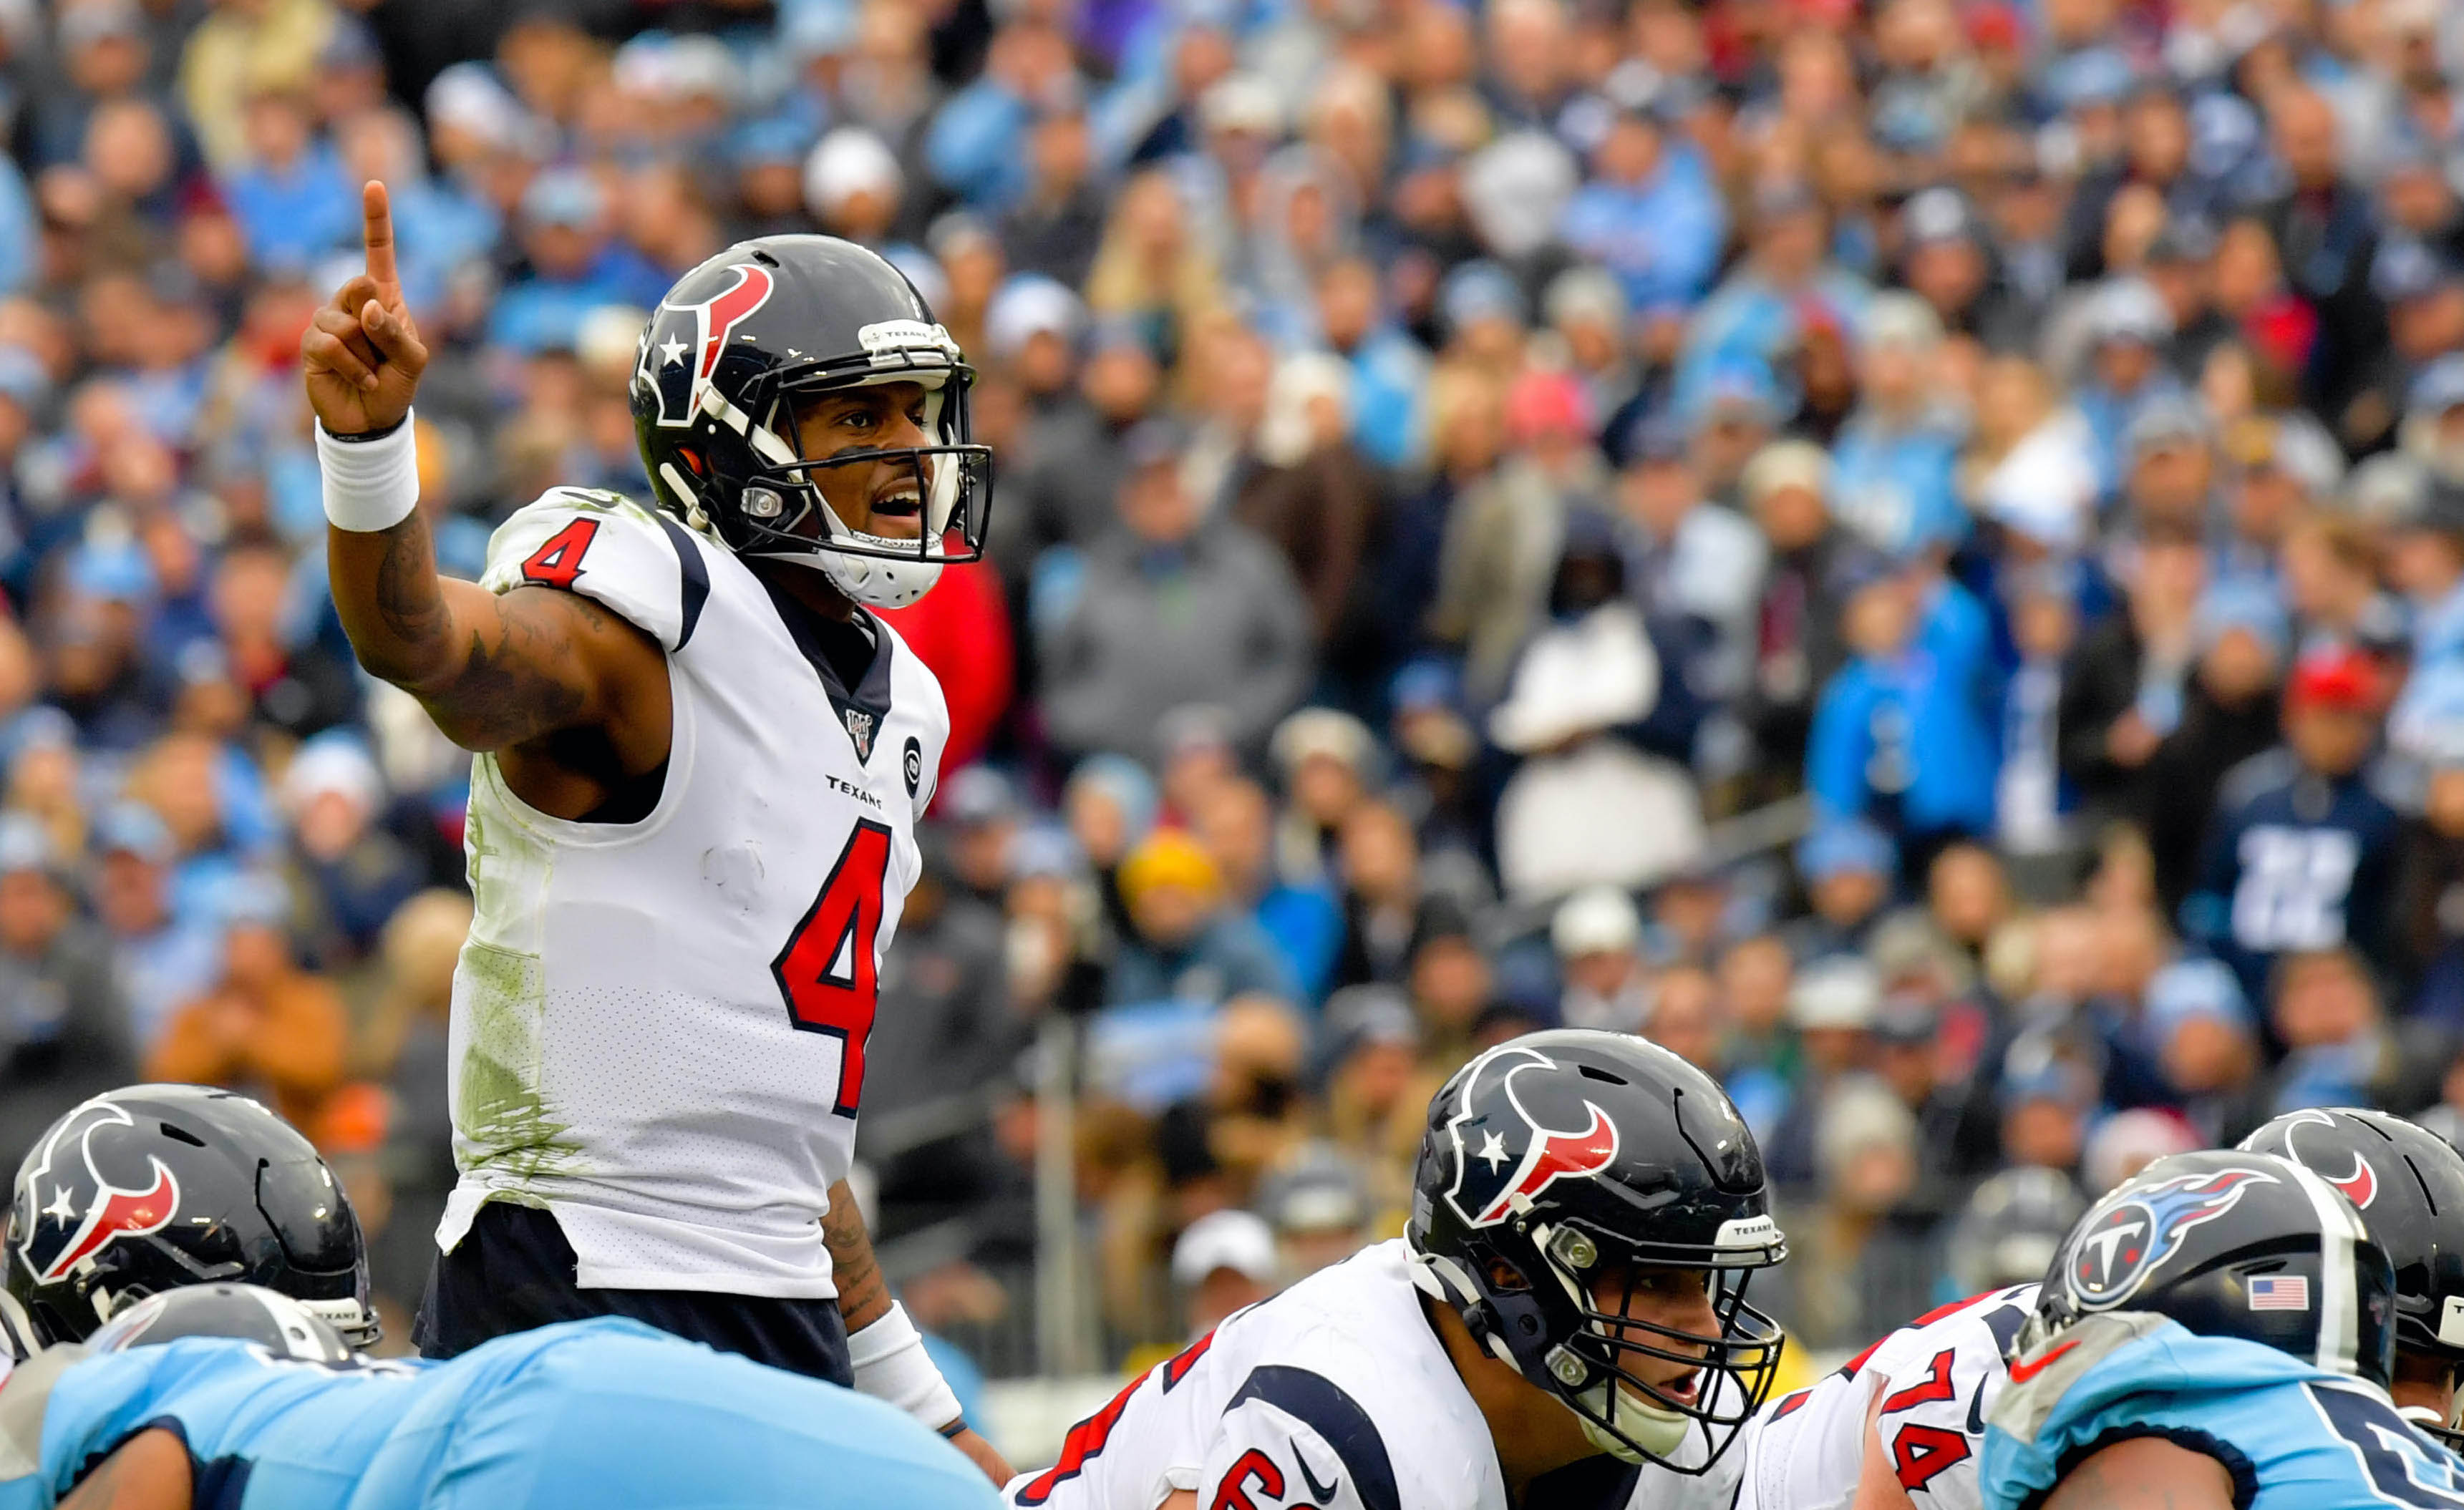 Flipboard: Texans Deshaun Watson's 4th Quarter Play Proved The Difference in The Win ...